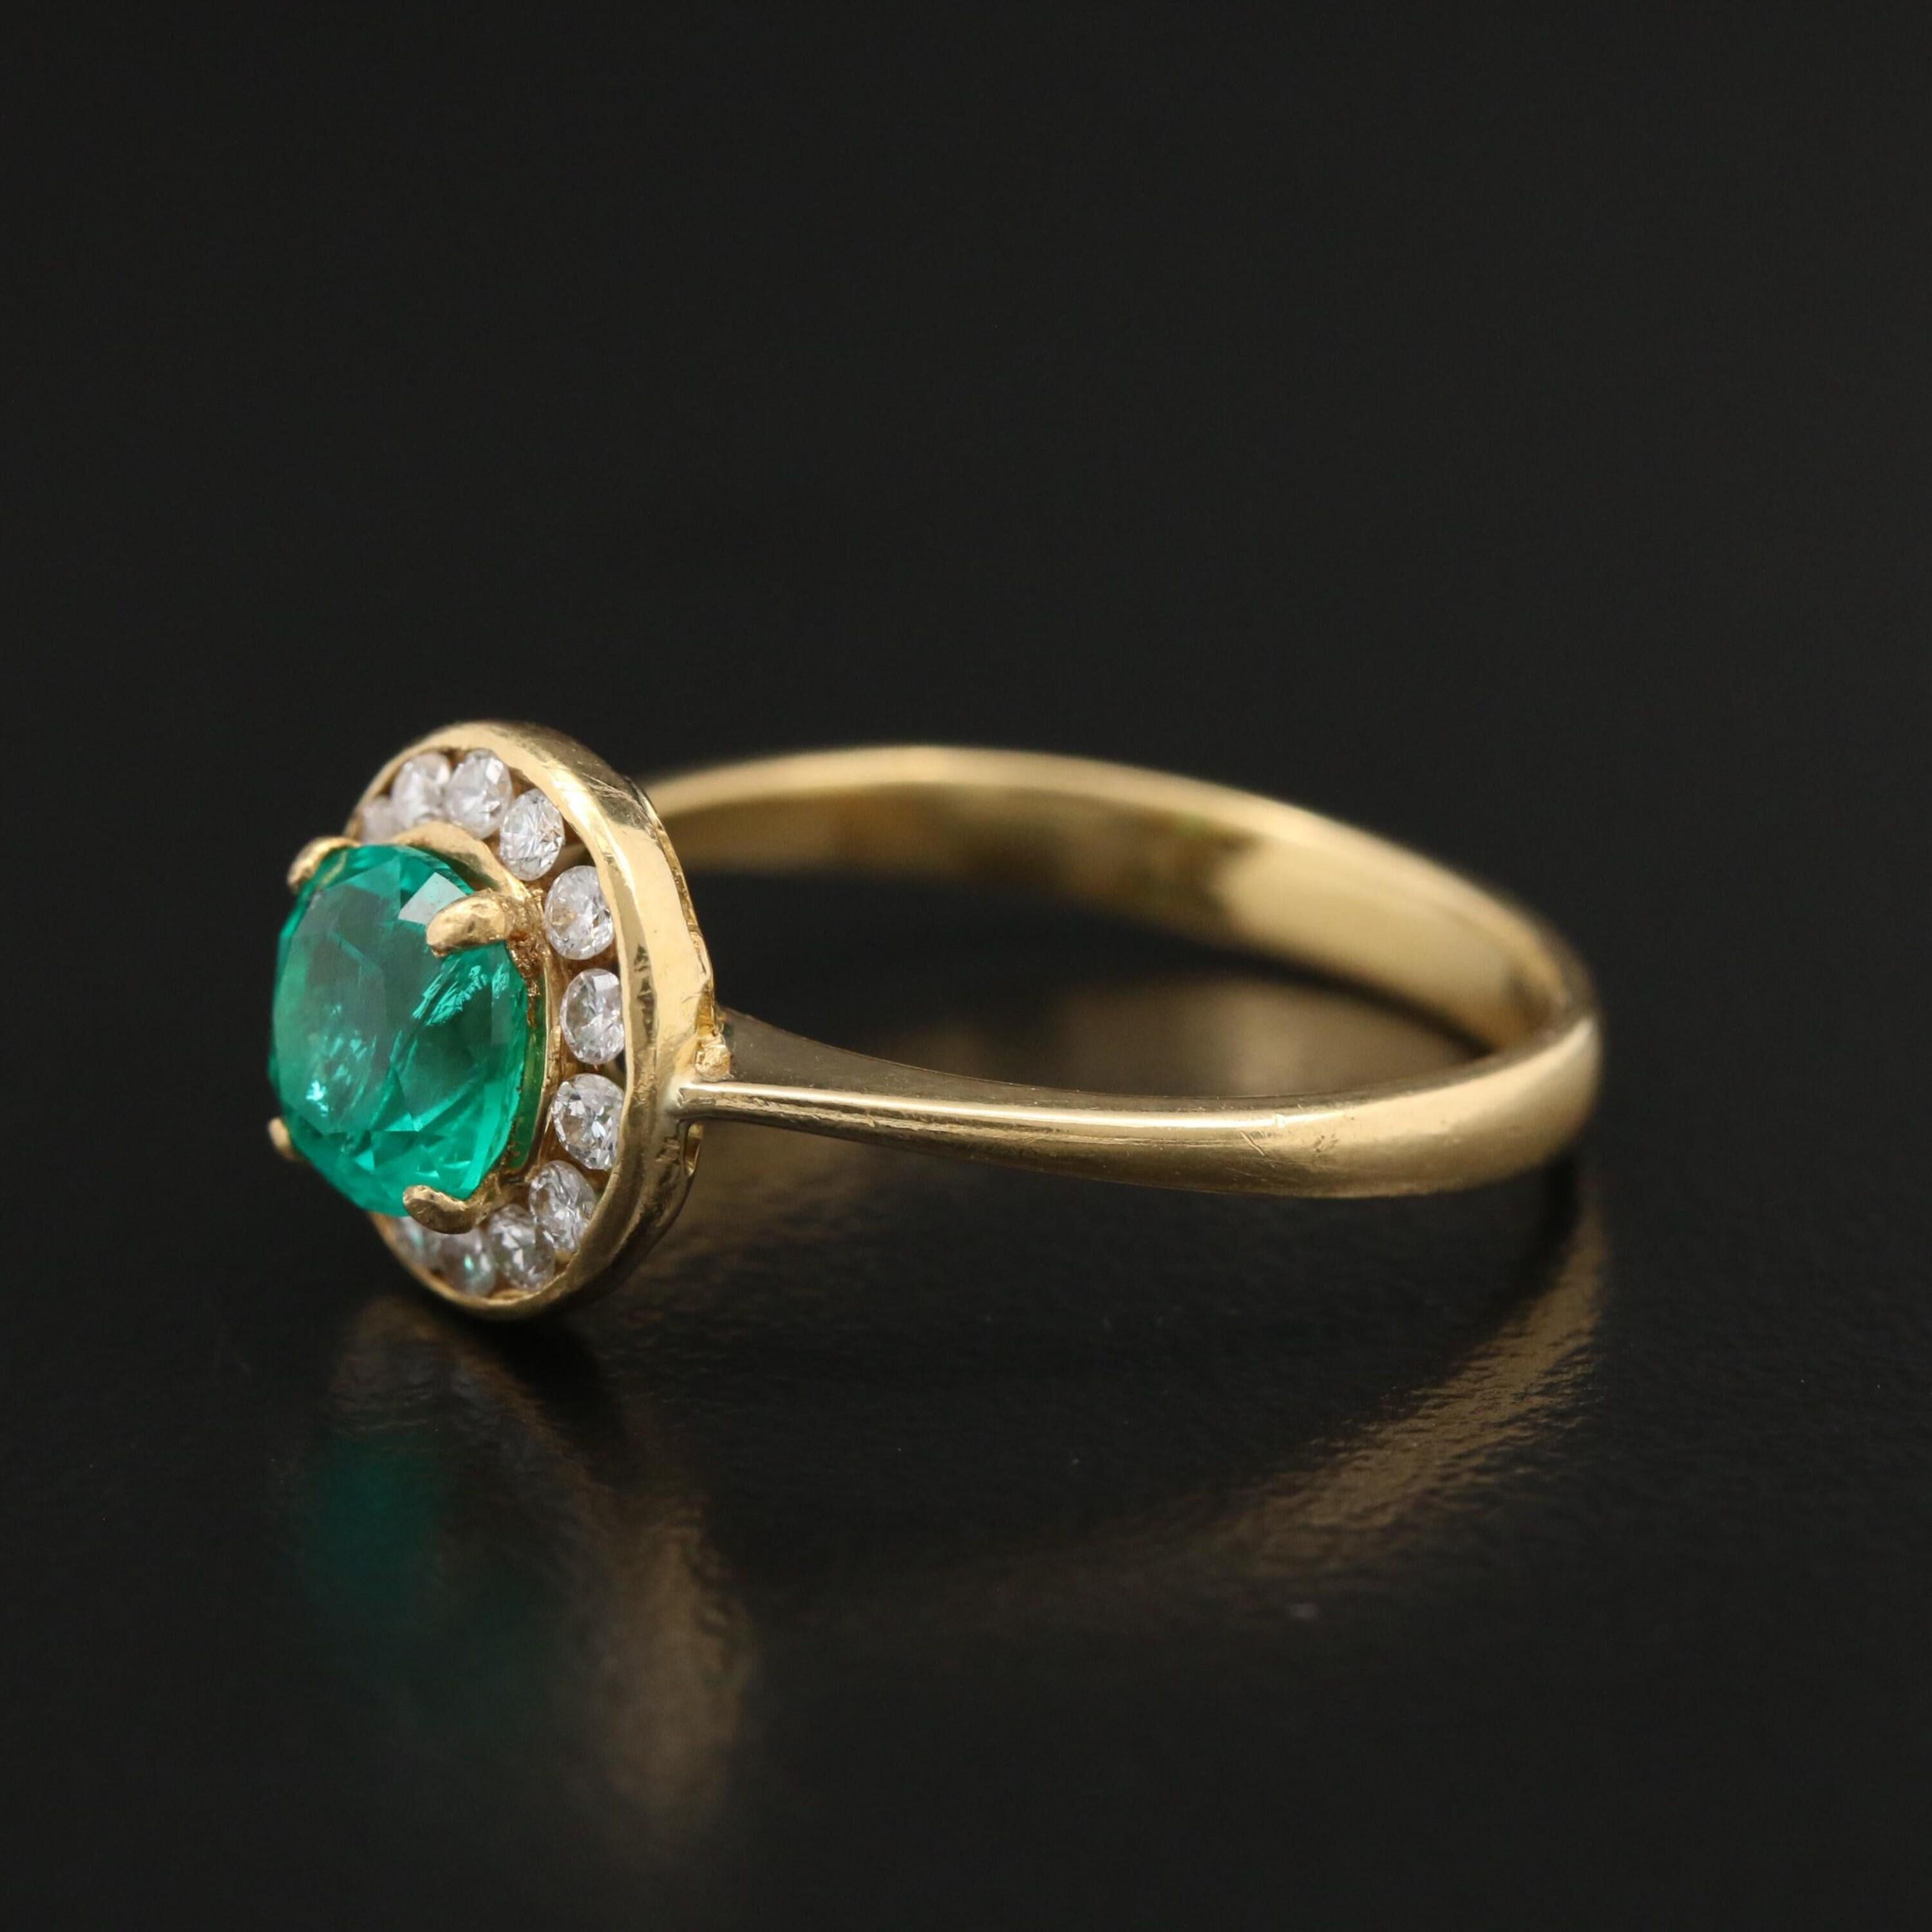 For Sale:  Halo Emerald Engagement Ring, Antique Emerald Wedding Ring 3